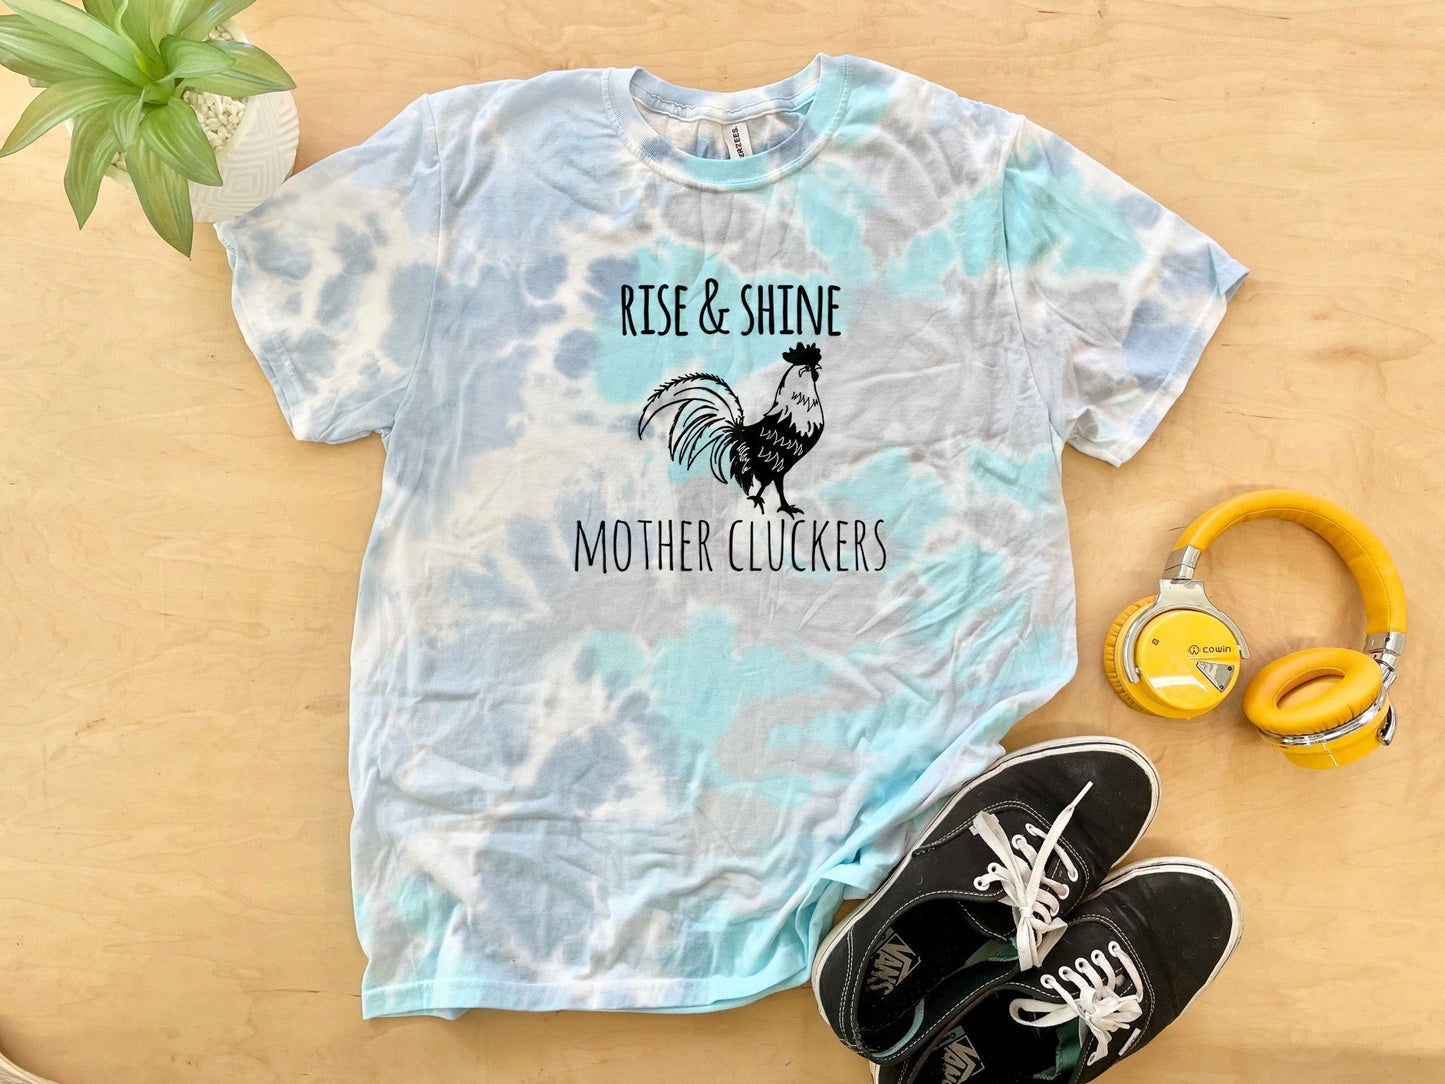 Rise & Shine Mother Cluckers - Mens/Unisex Tie Dye Tee - Blue